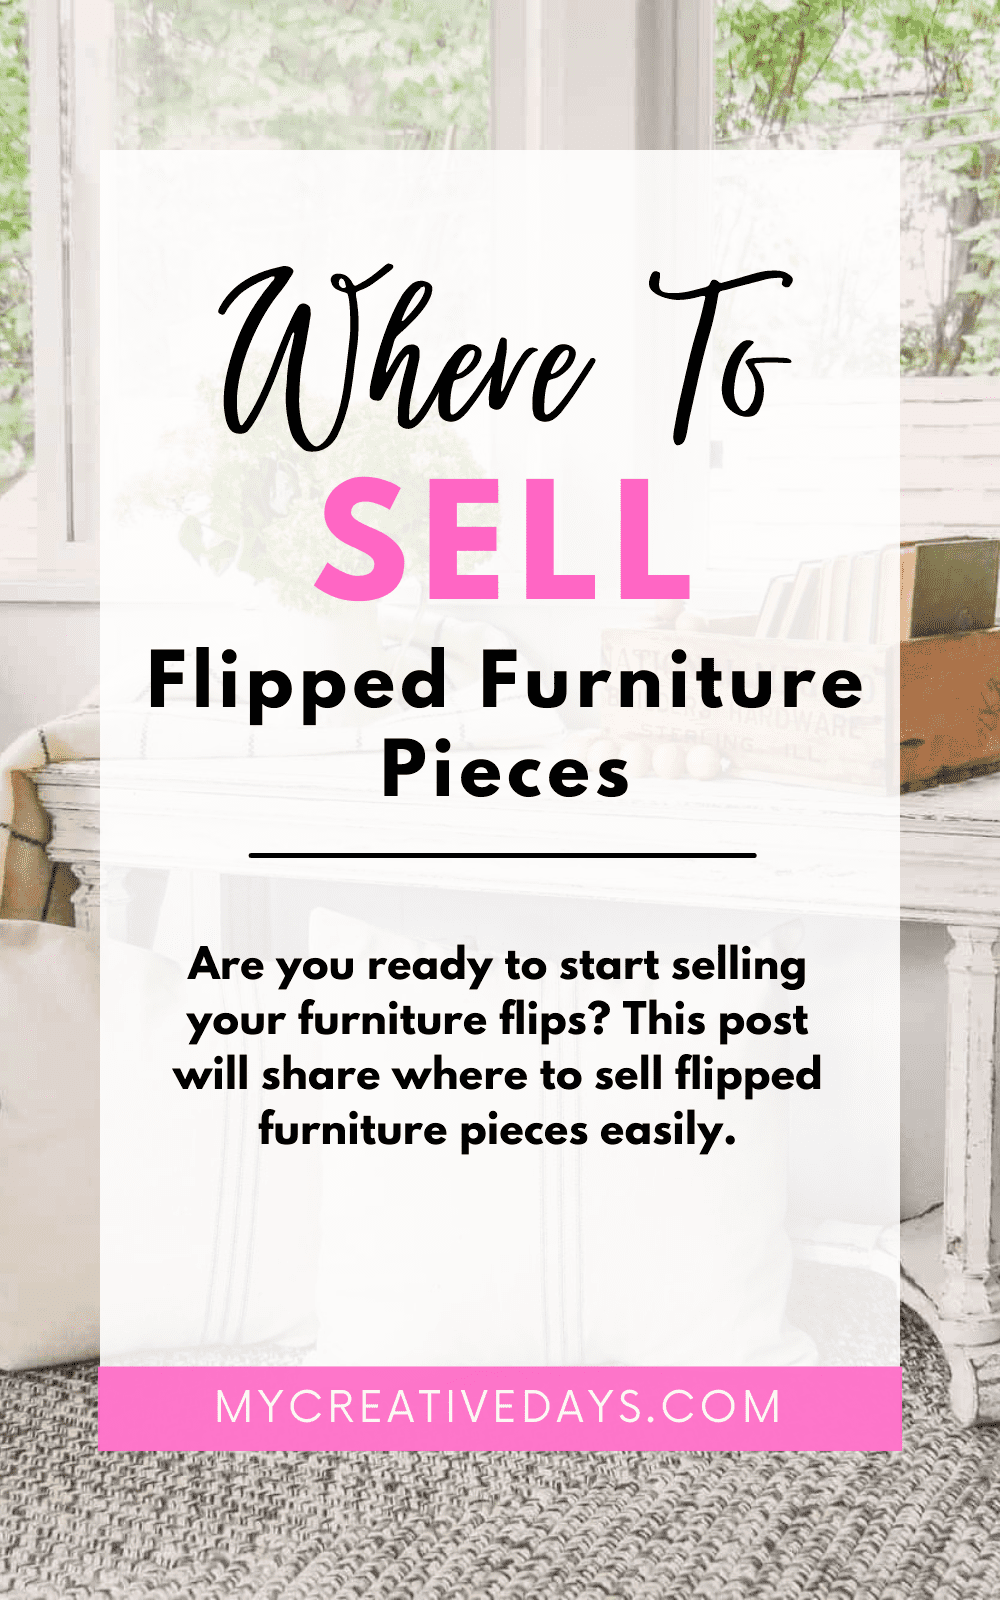 Are you ready to start selling your furniture flips? This post will share where to sell flipped furniture pieces easily.